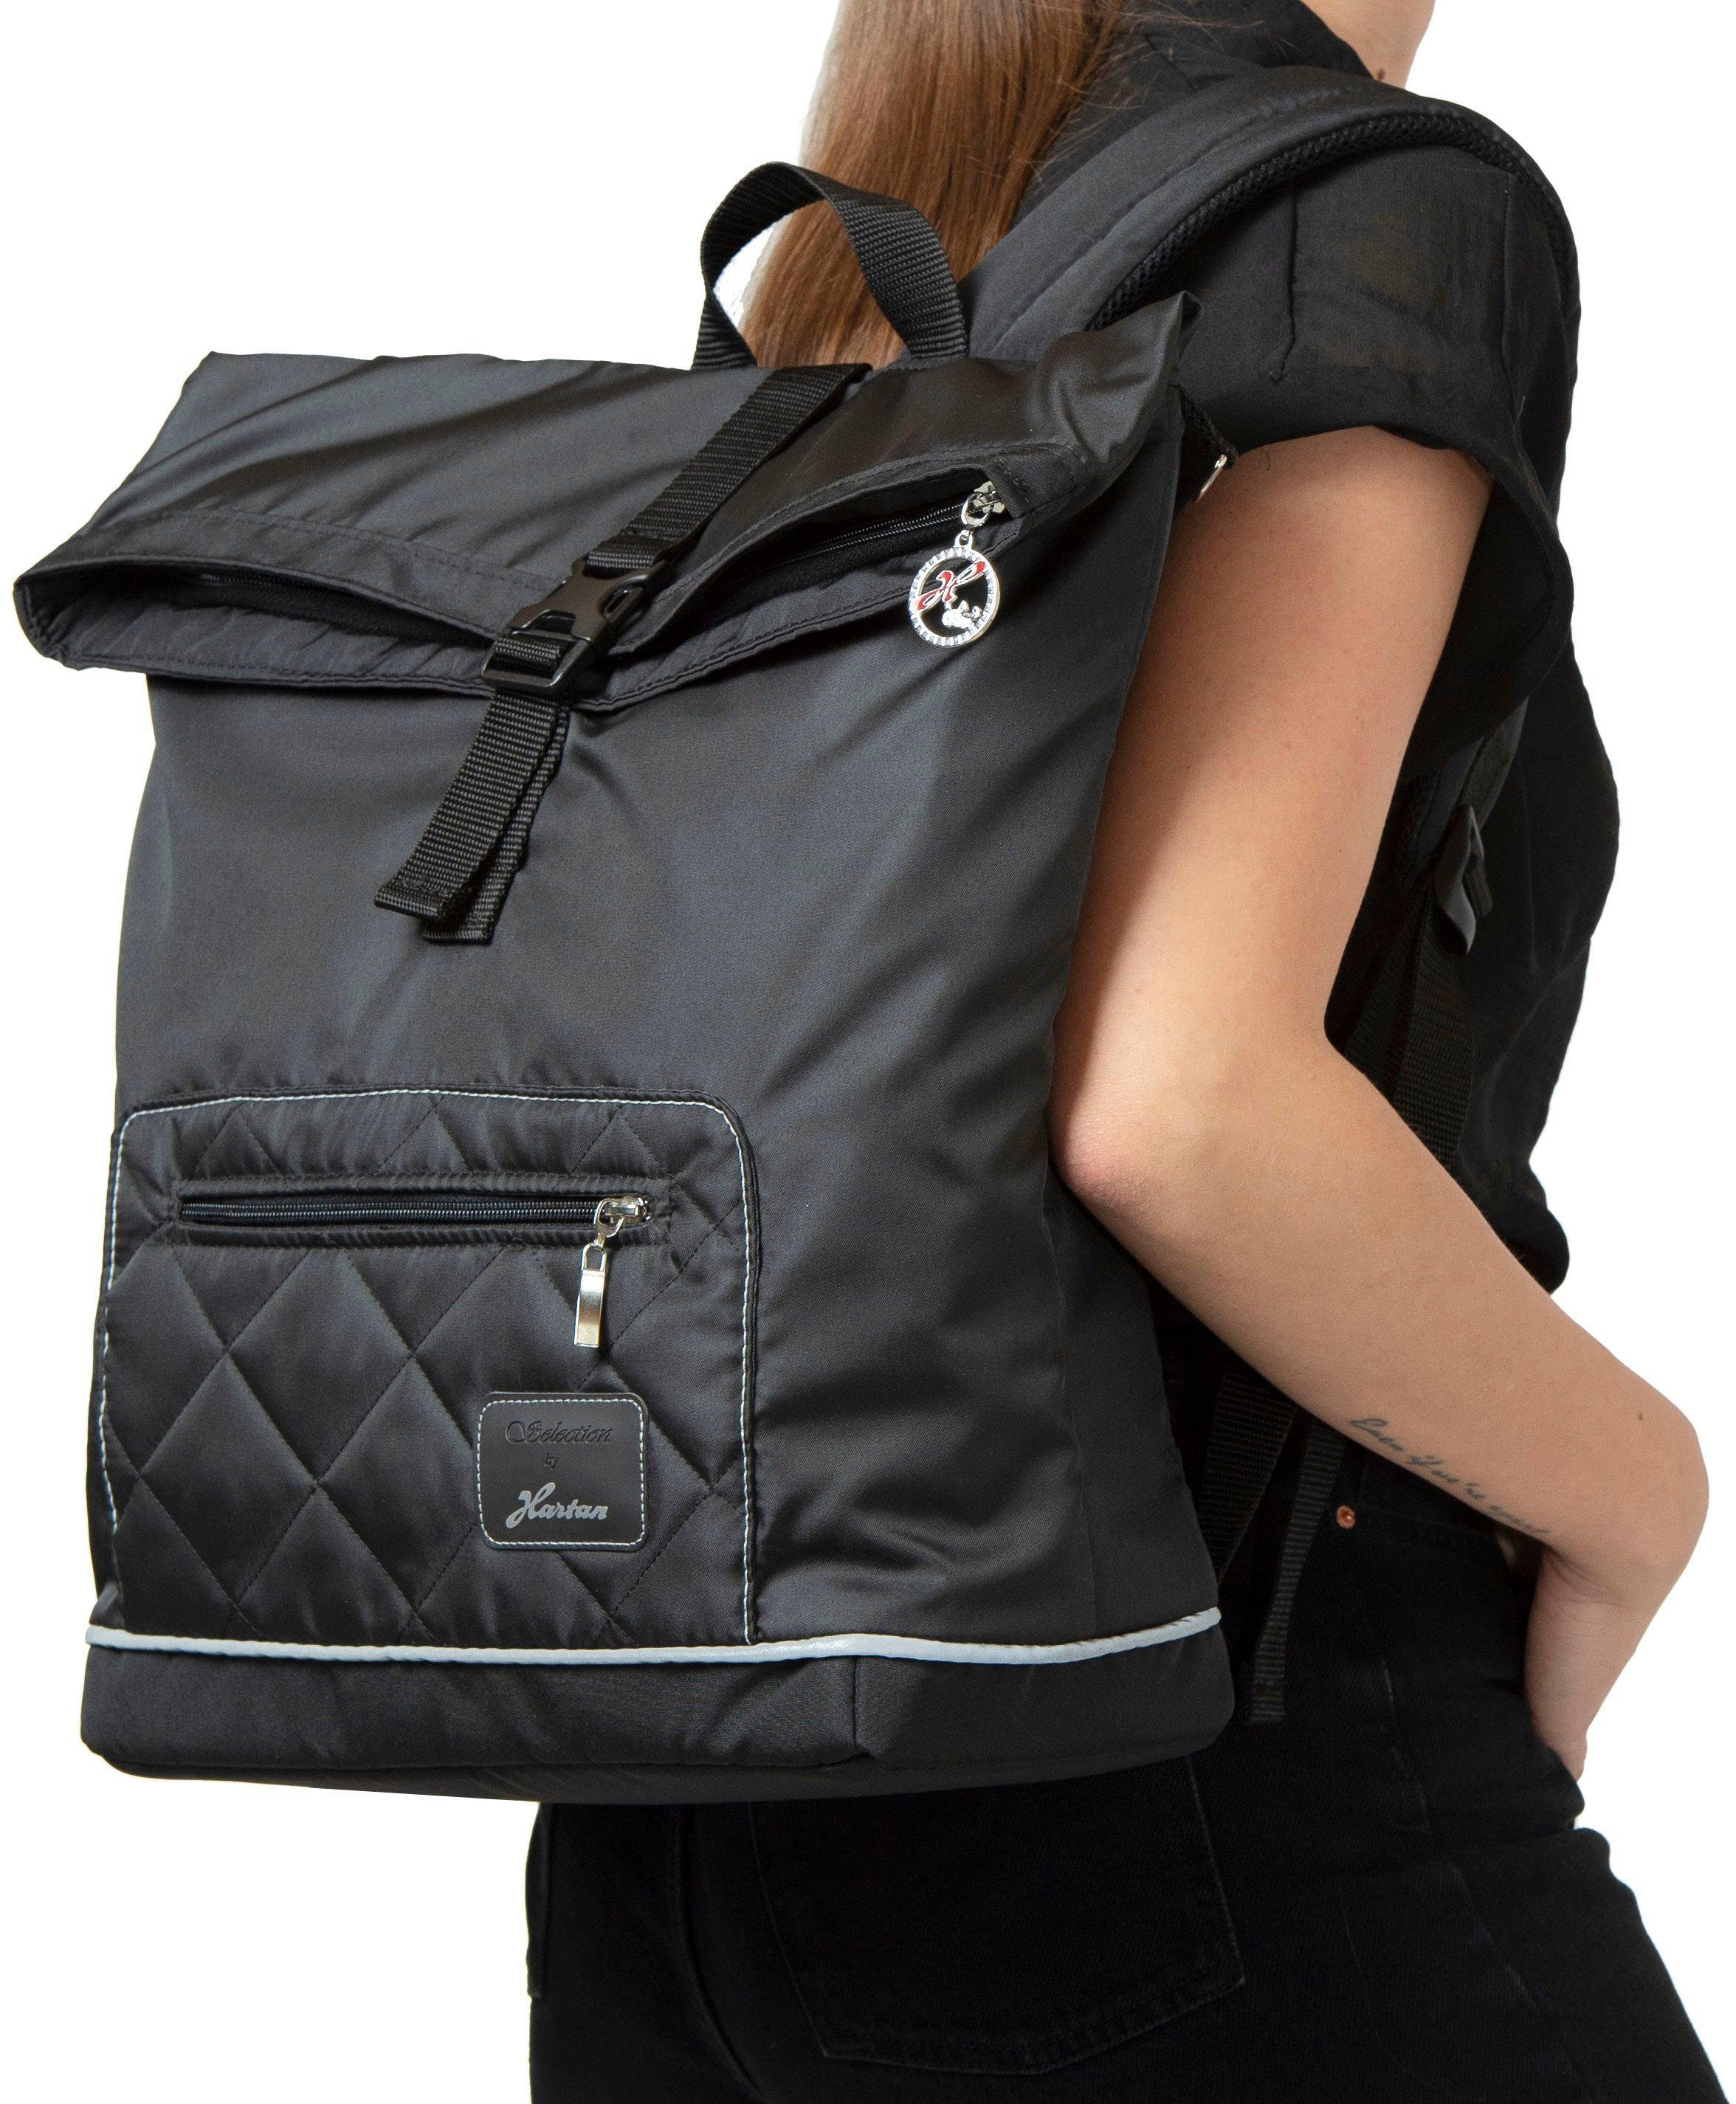 bag Thermofach; pandy Wickelrucksack mit Space - Collection, Made in Casual Germany family Hartan